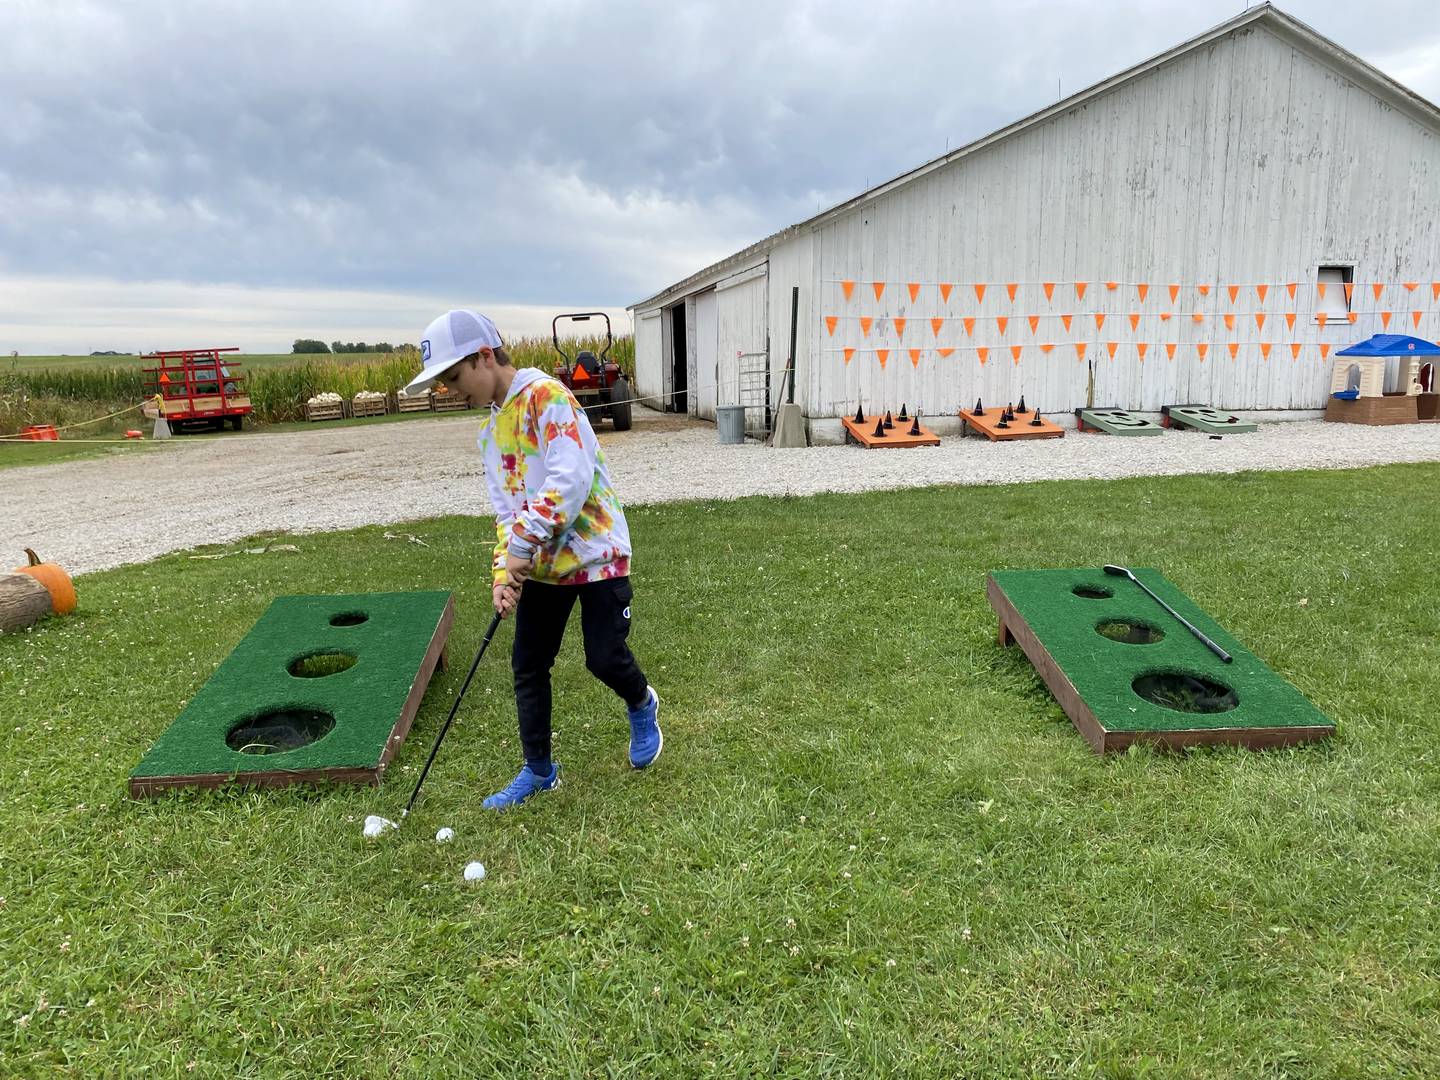 Try to hook a ring on a witch's hat or toss a bag into the face of Frankenstein's monster at Sugar Grove Pumpkin Farm, 4S041 Merril Road. These games, and a golf version of cornhole, were handmade by the farm's owners.